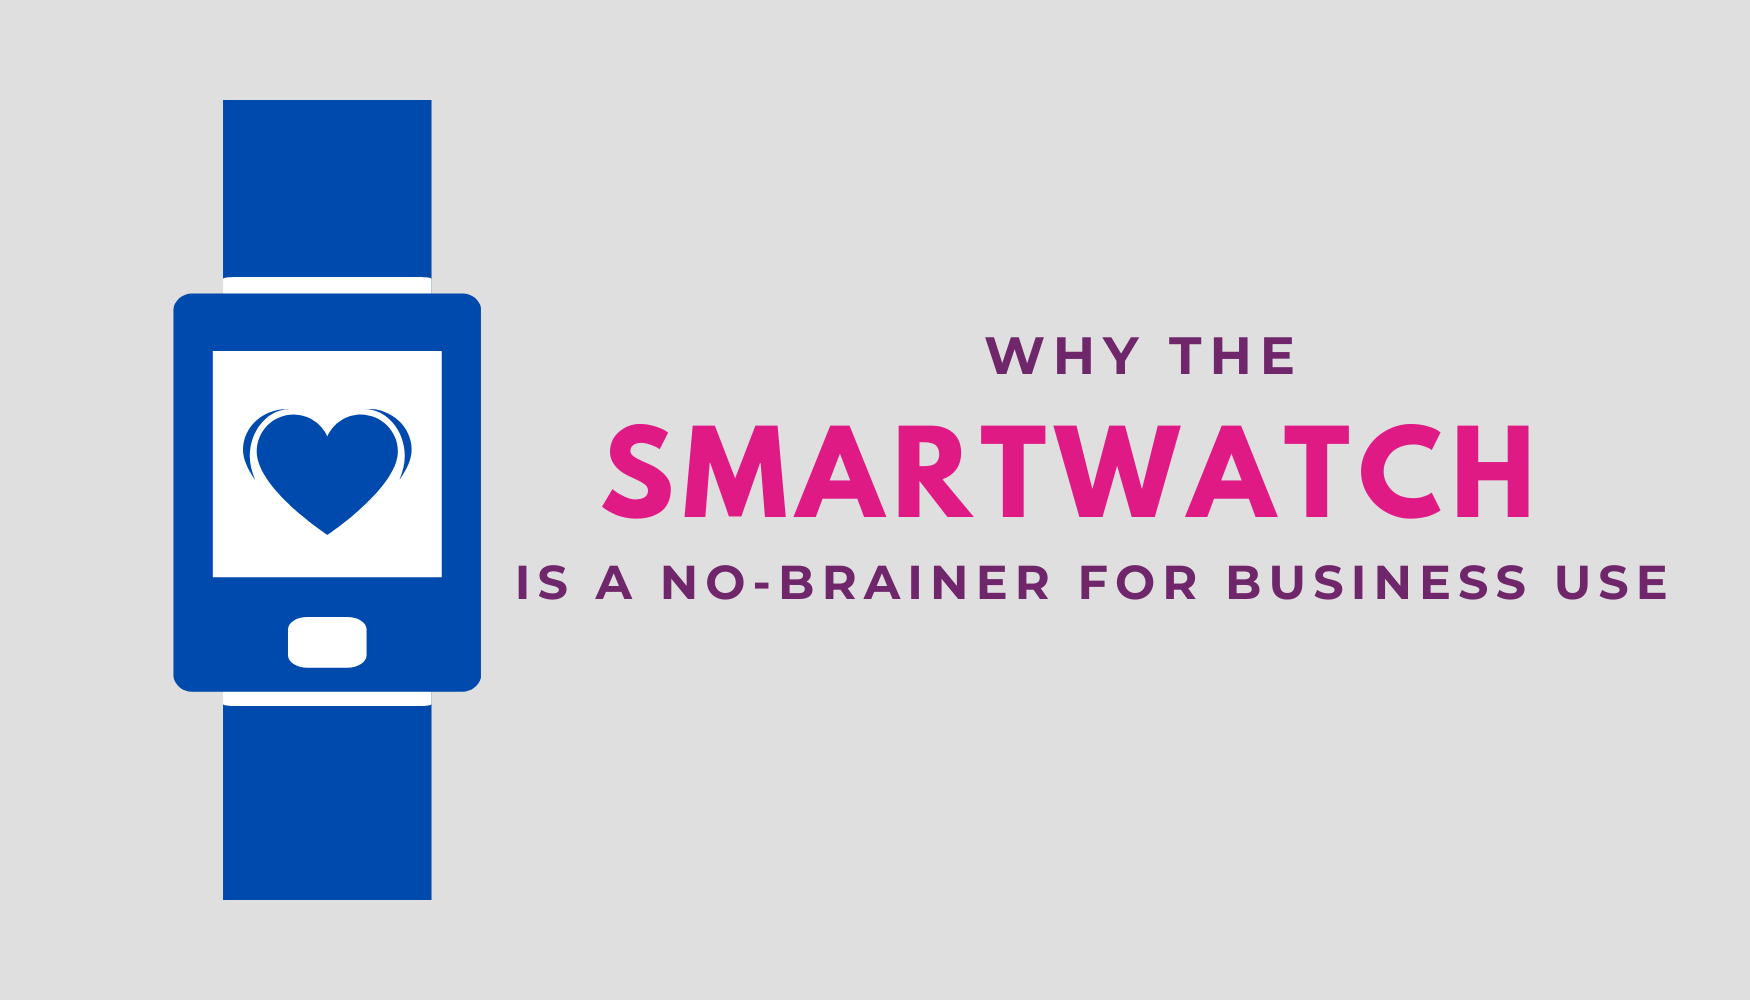 Why The Smartwatch is a No-Brainer For Business Use